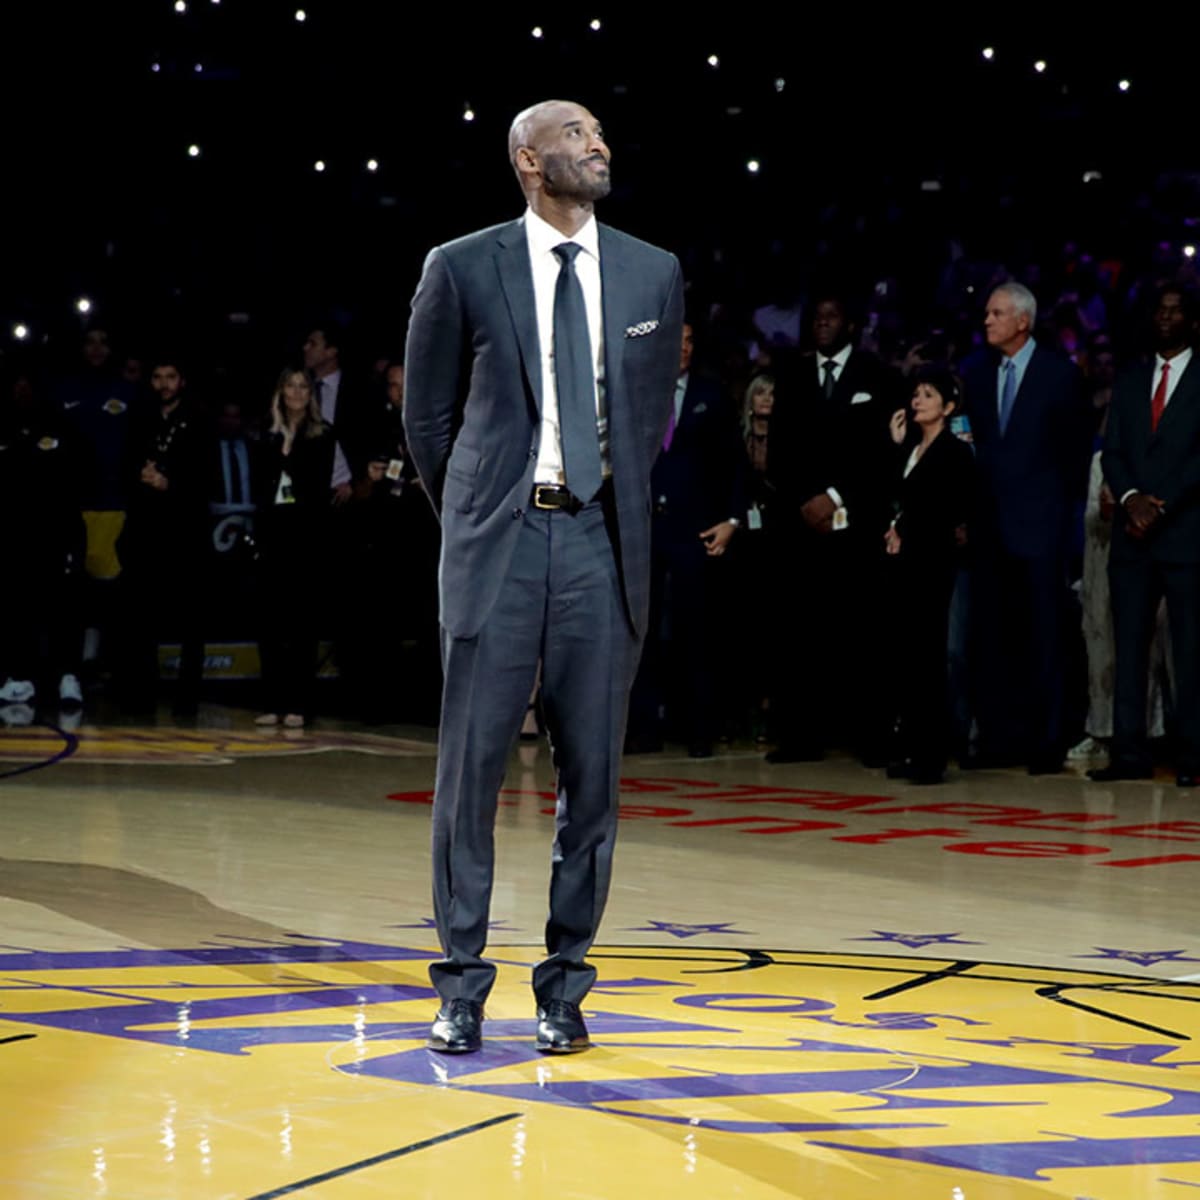 The Lakers' retired jerseys are normally covered up during